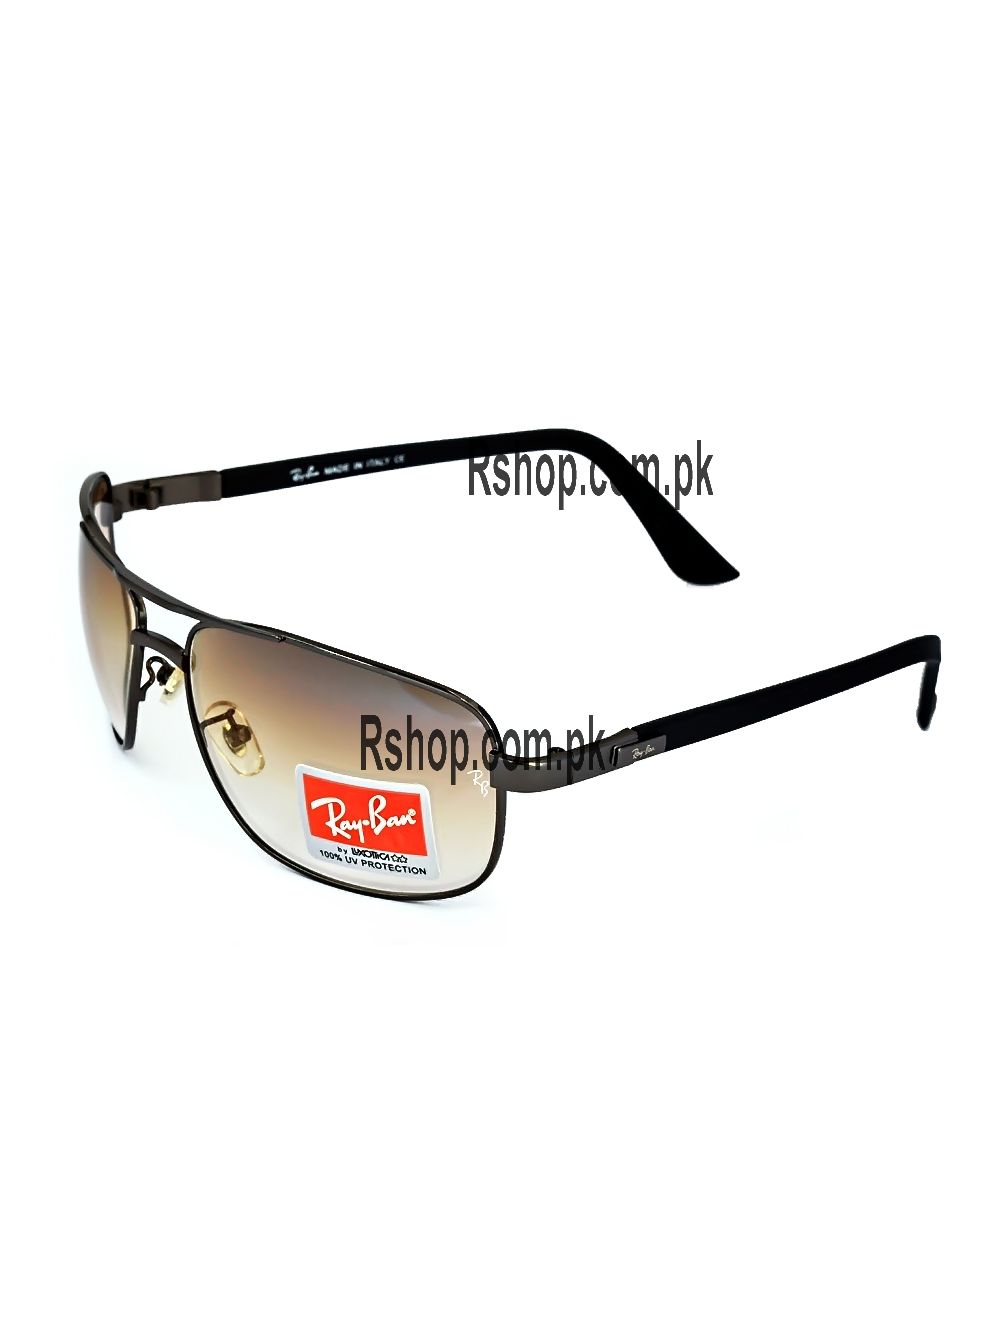 Buy Ray Ban Sunglasses Online in Pakistan, Ray Ban sunglasses, Men's Ray  Ban Sunglasses in Pakistan